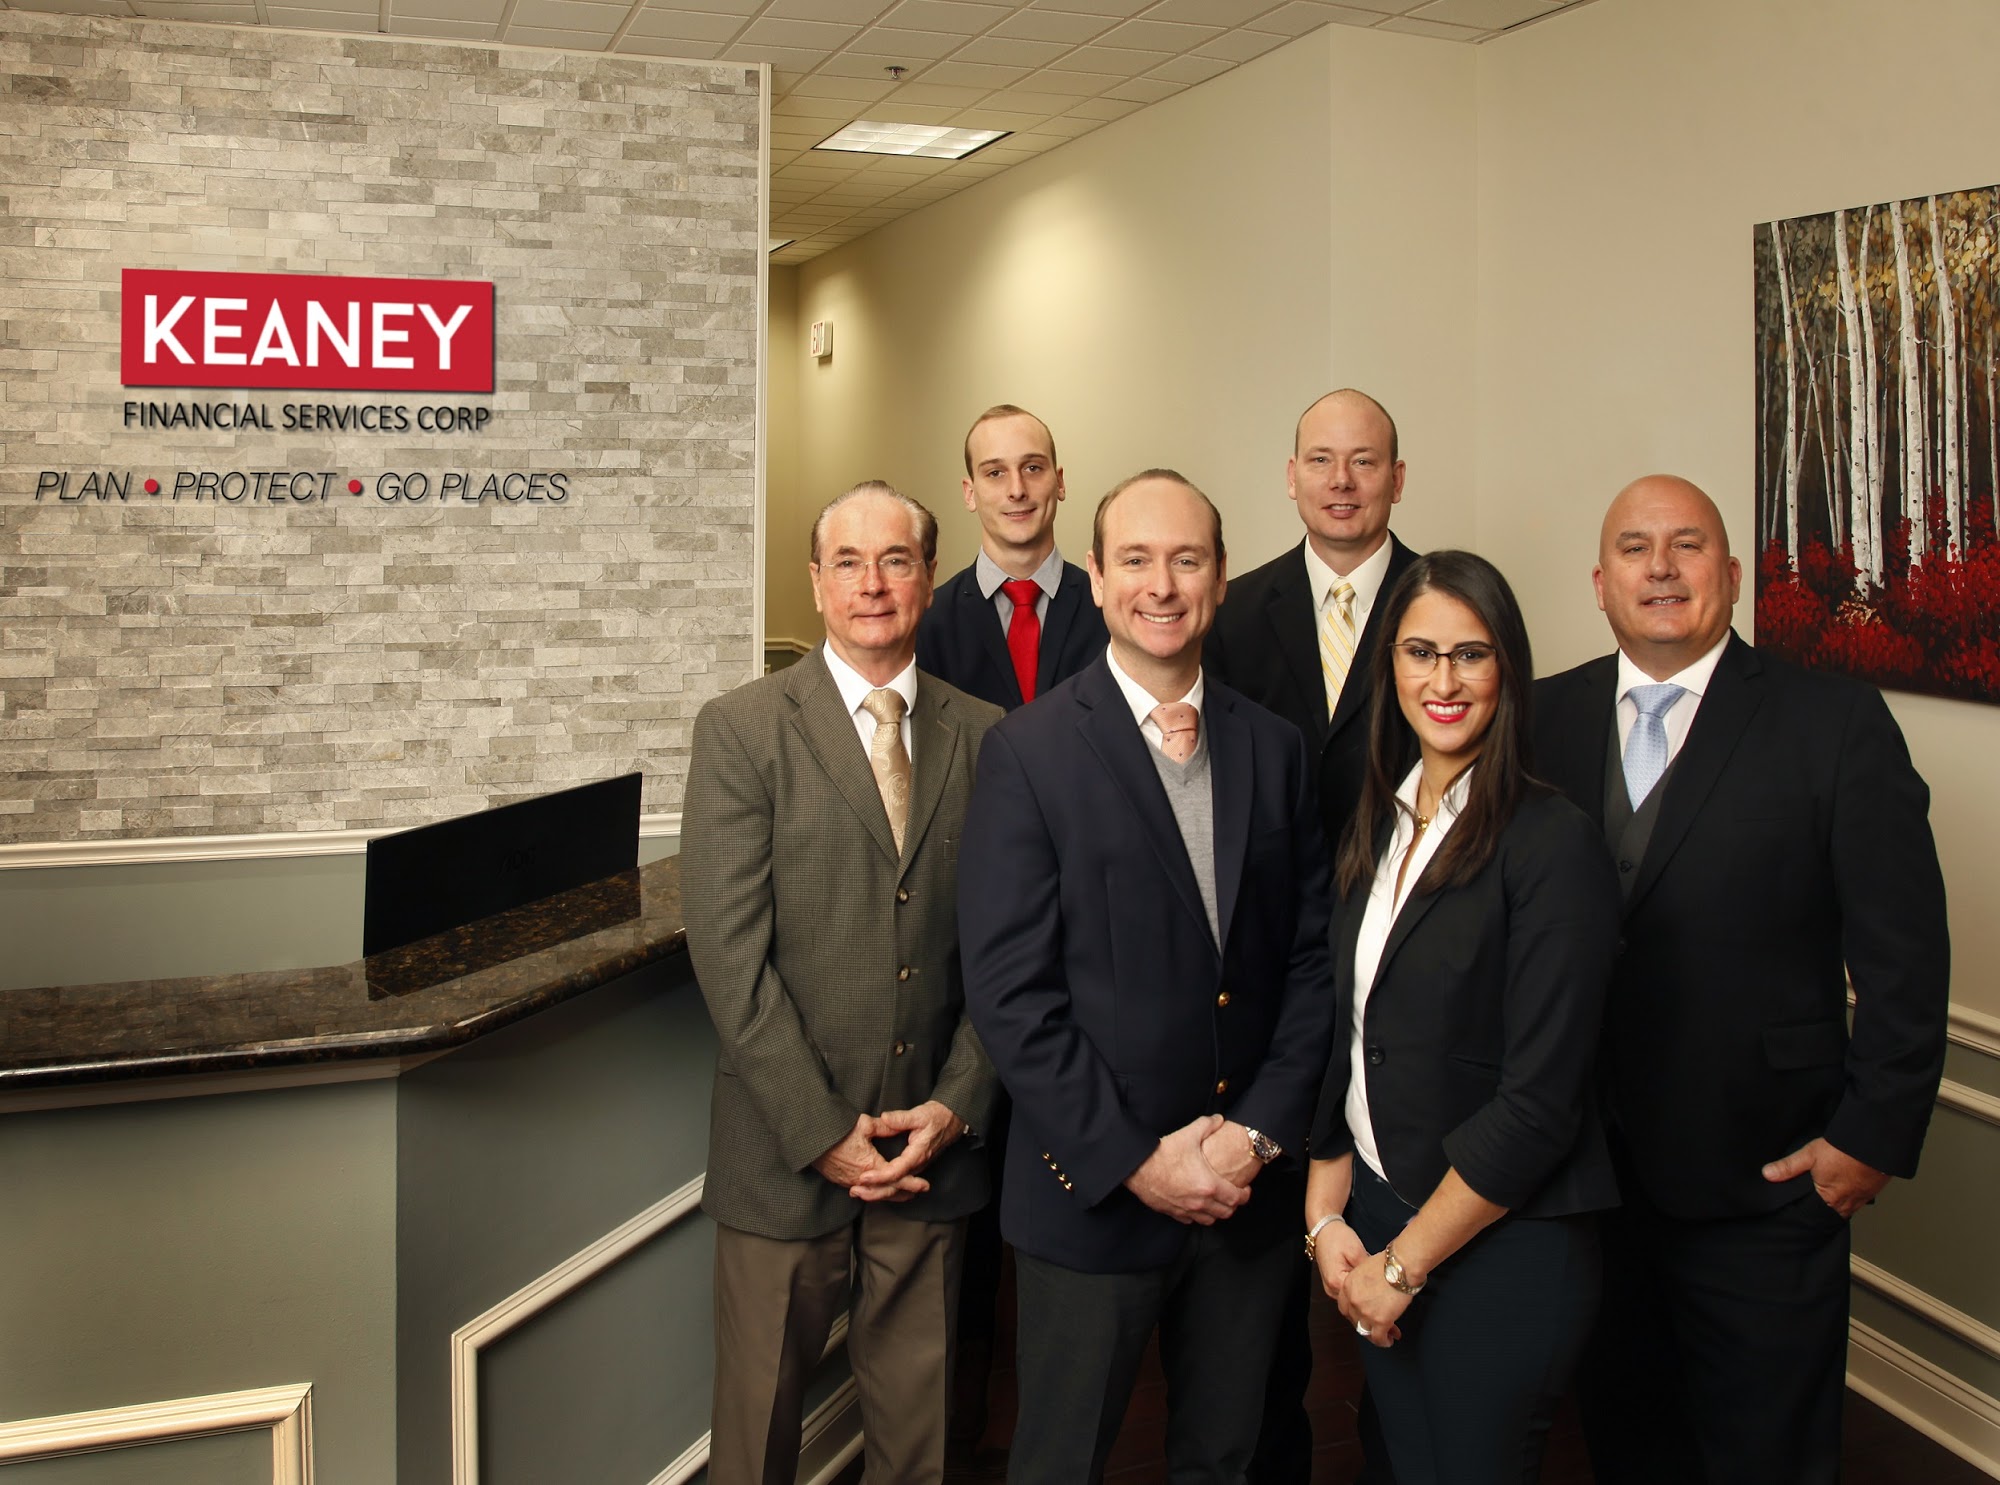 Keaney Financial Services Corp.